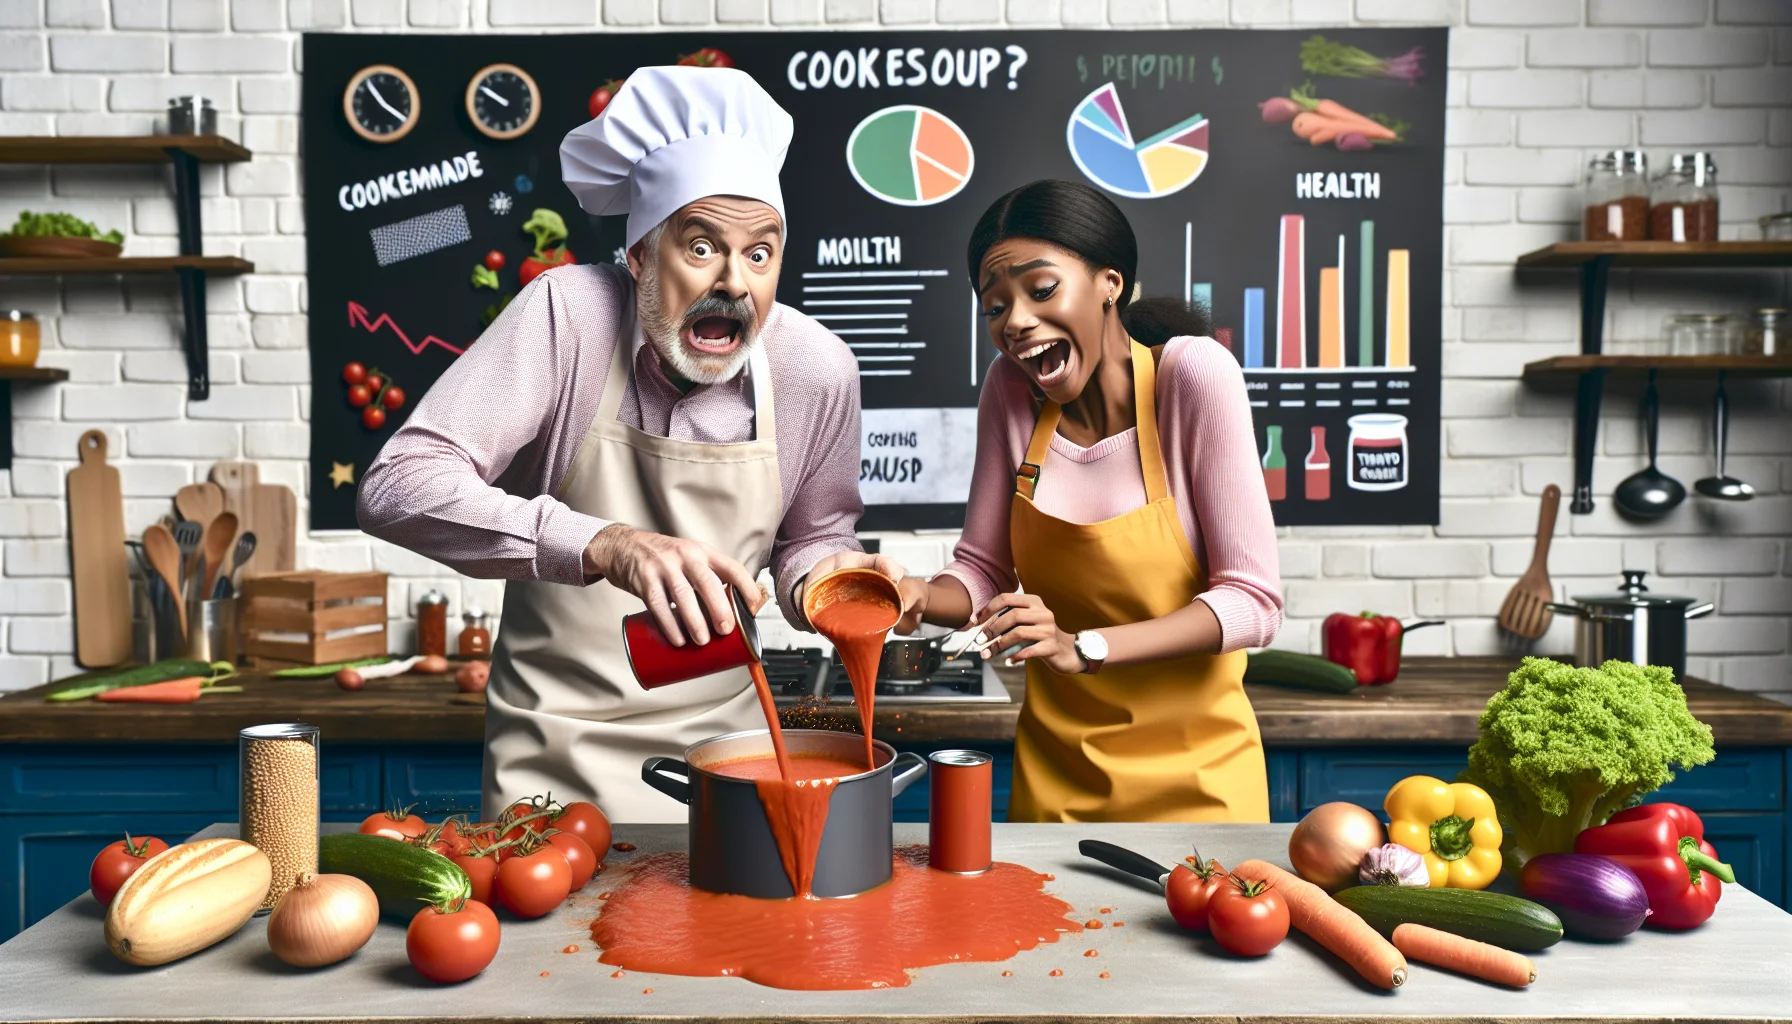 Create an image of a humorous scenario. A middle-aged Caucasian male and a young Black female are making tomato soup from tomato sauce in a kitchen buzzing with activity. They wear bright-colored aprons and chef hats, with the male accidentally causing a splash of sauce while stirring. They are surrounded by fresh vegetables, a cooking pot, a can of tomato sauce, and cooking utensils. Various charts and graphs on the wall indicate the cost-effectiveness and health benefits of homemade meals. The atmosphere is jovial and enticing, urging people towards the idea of eating healthy for less money.